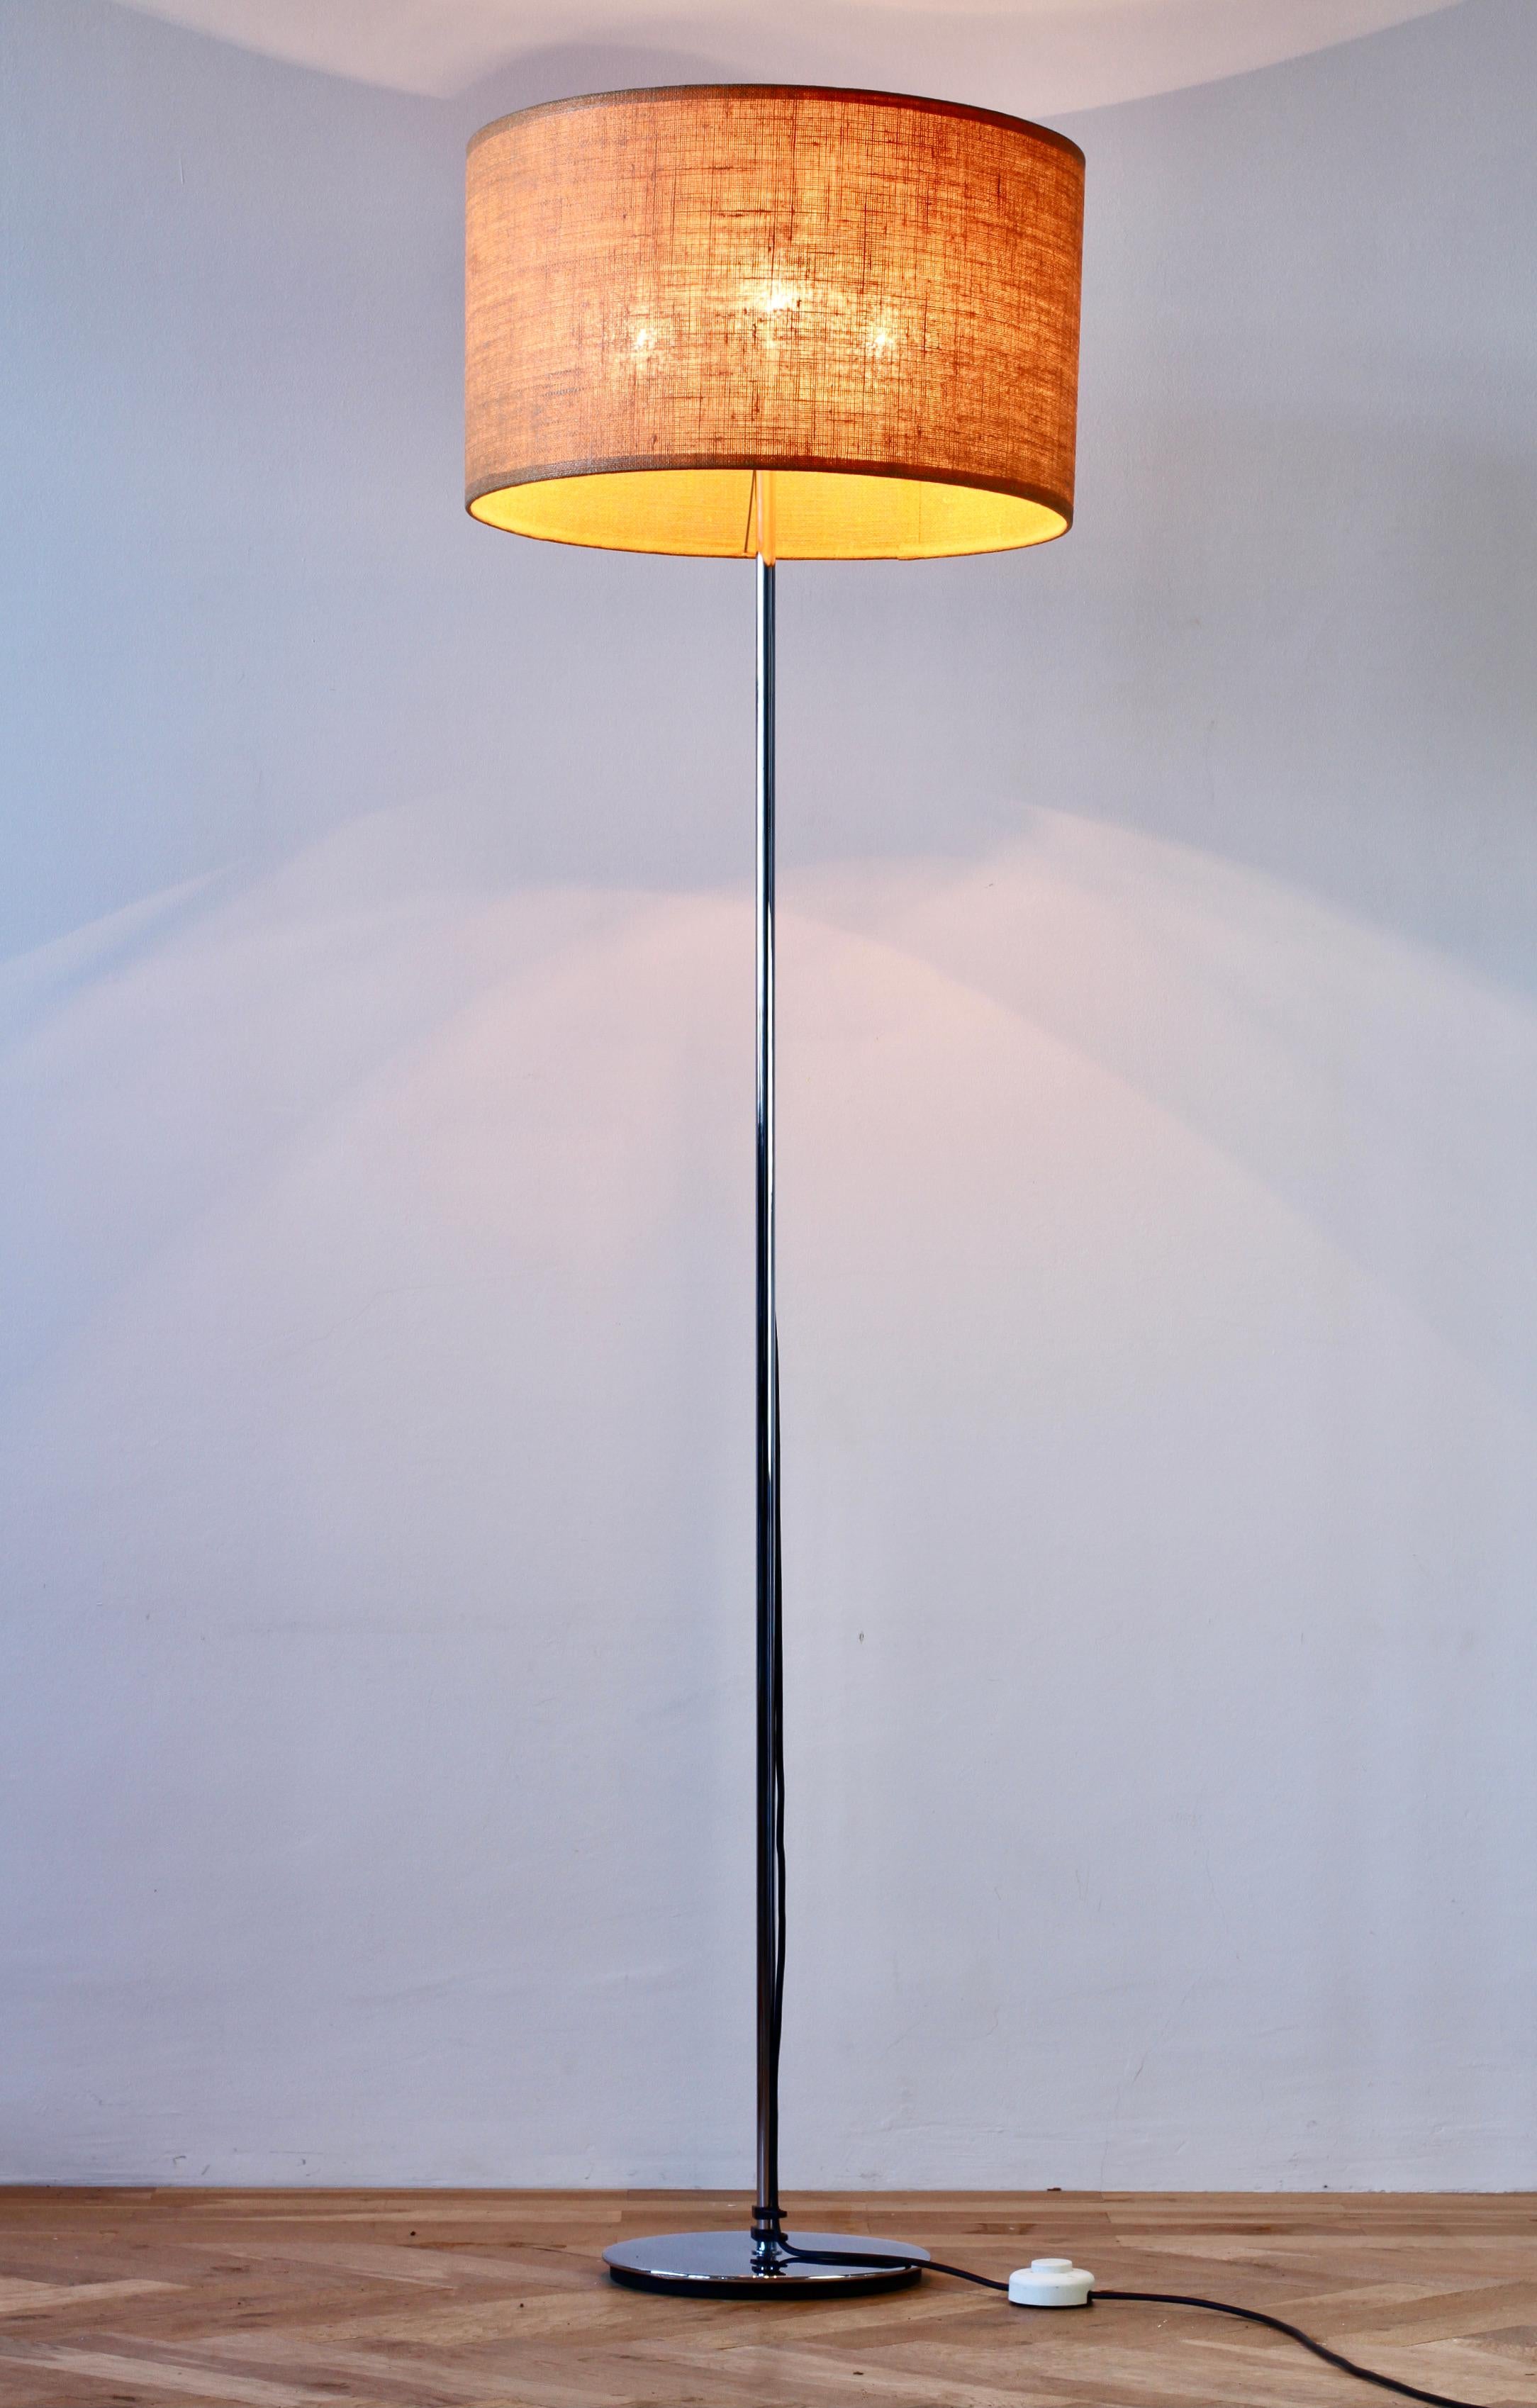 Mid-Century Modern vintage German floor lamp made by Staff Leuchten circa 1970s and is in excellent vintage condition. Made of polished chrome plated metal, the original woven fabric lamp shade is height adjustable making this the perfect modernist